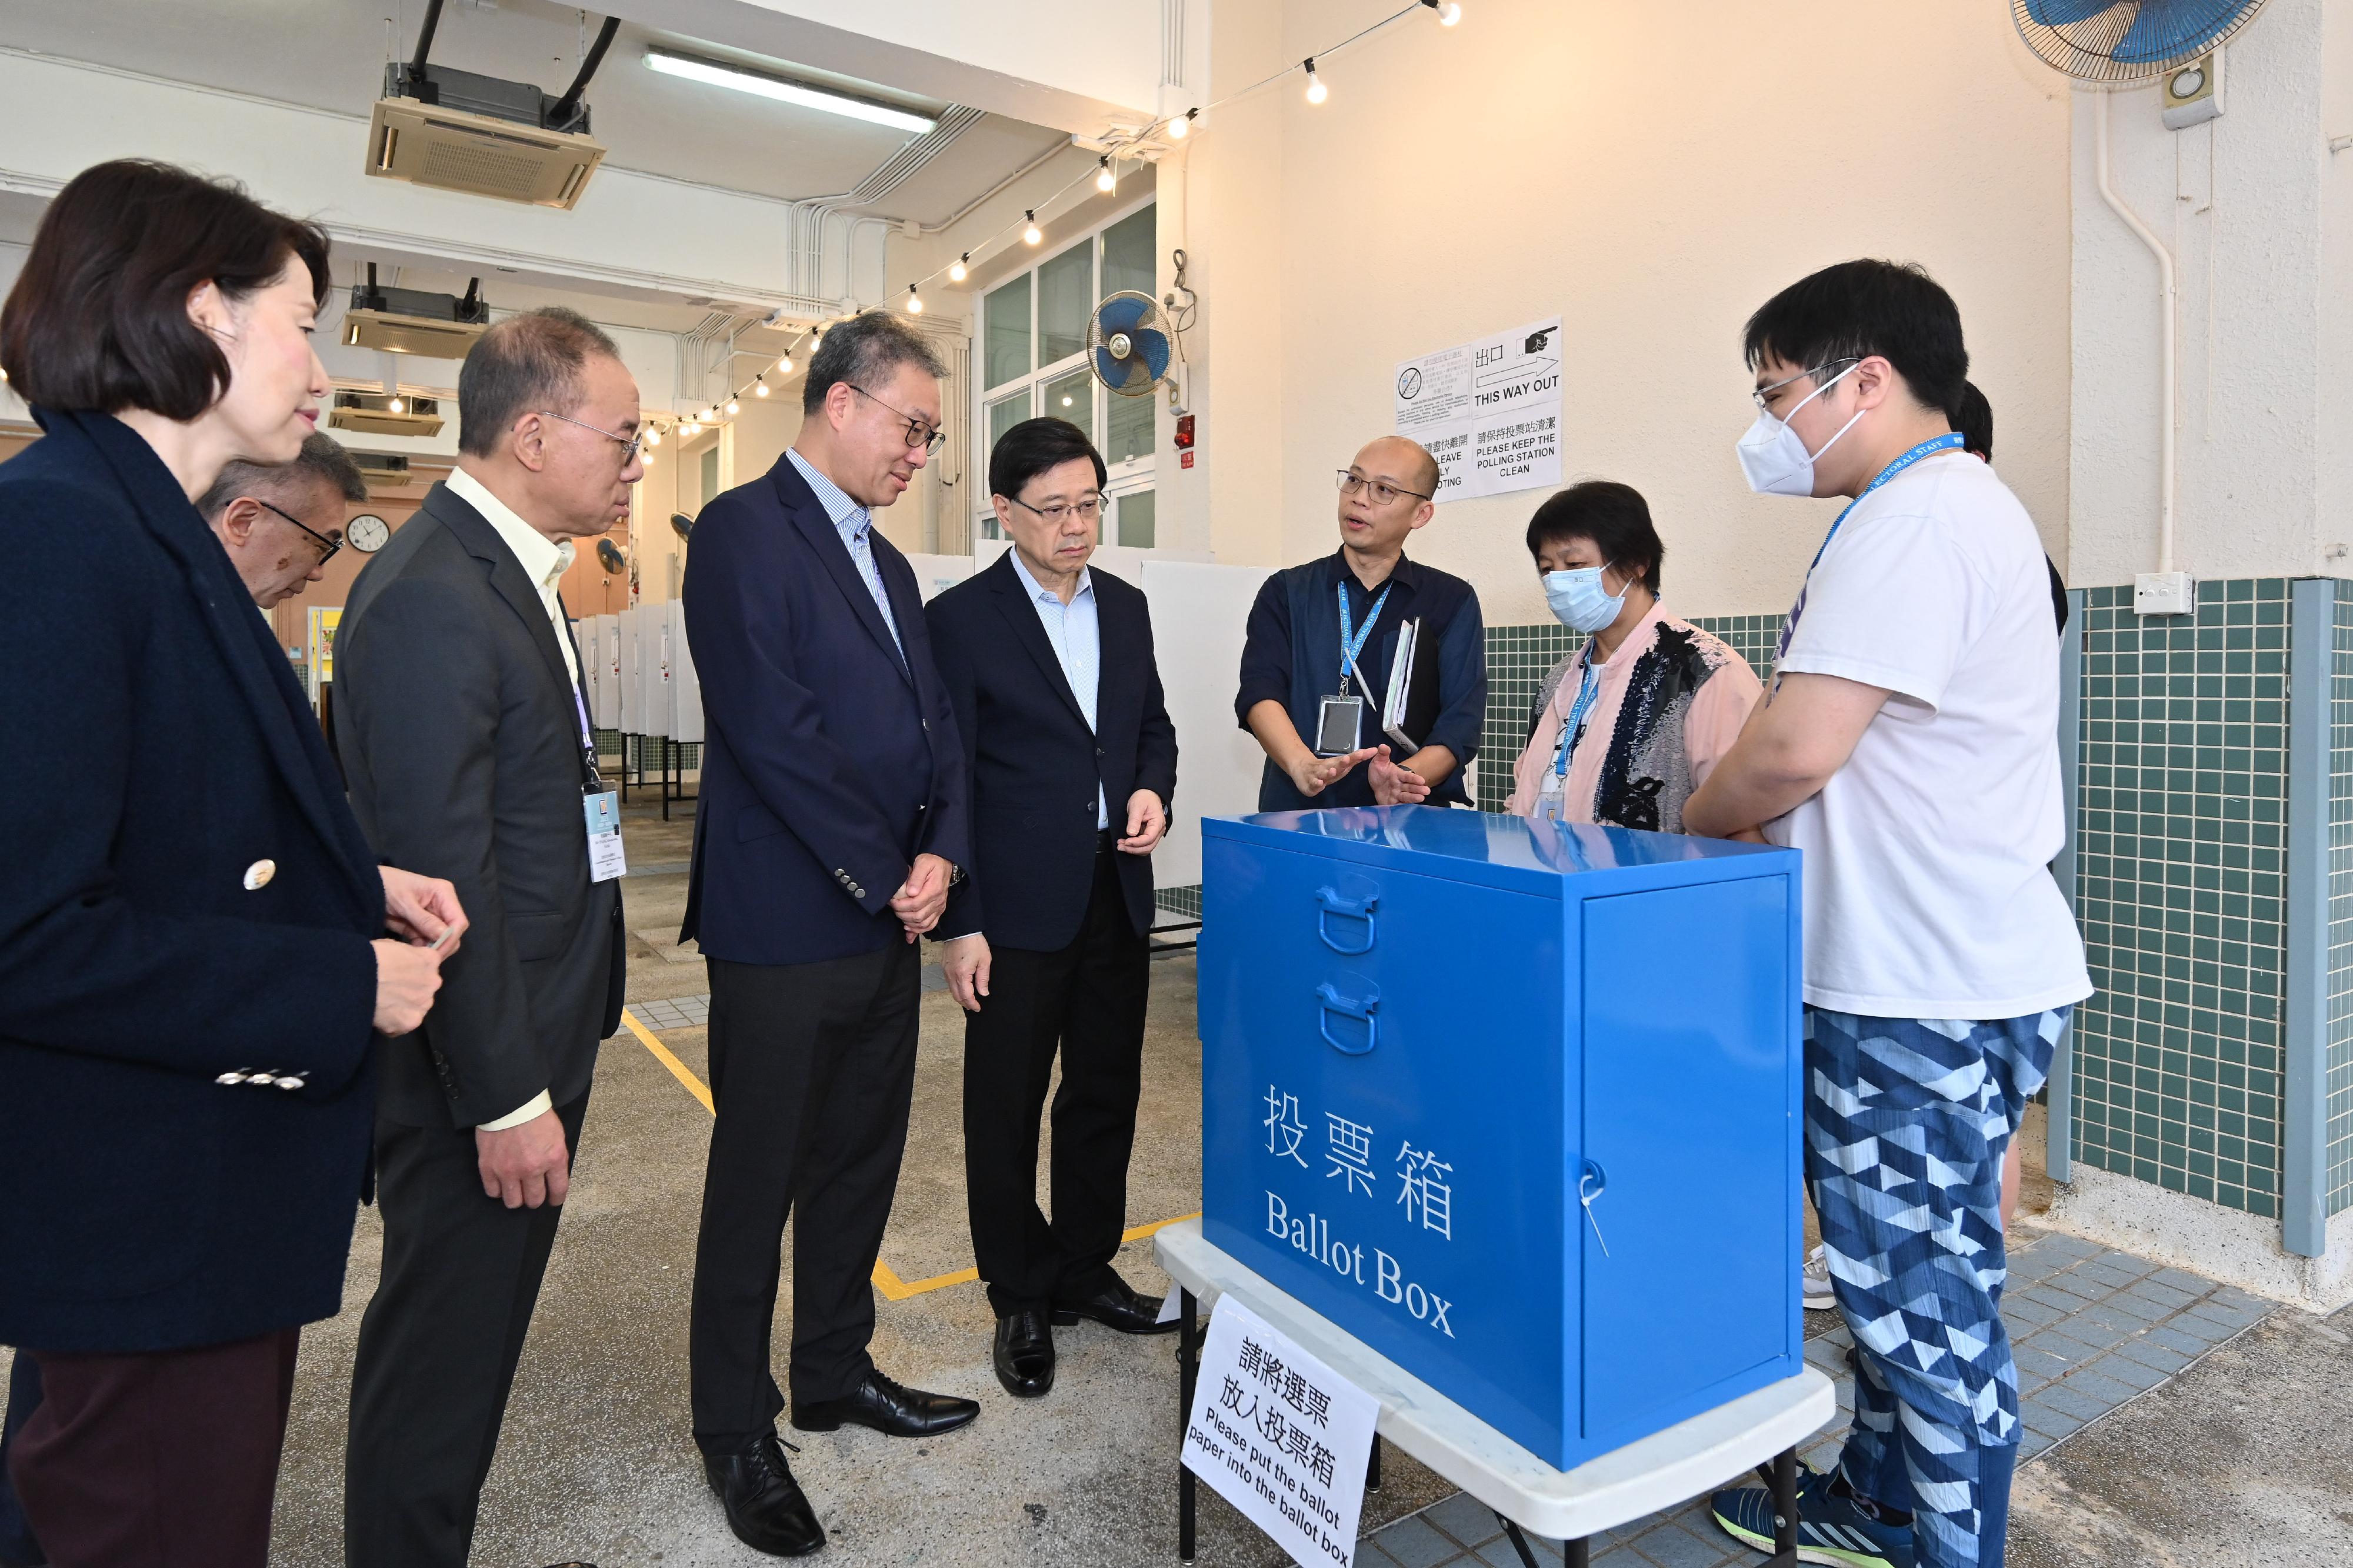 The Chairman of the Electoral Affairs Commission, Mr Justice David Lok (third left), and the Secretary for Constitutional and Mainland Affairs, Mr Erick Tsang Kwok-wai (second left), accompanied the Chief Executive, Mr John Lee (fourth left), to inspect the District Council geographical constituency polling station of the 2023 District Council Ordinary Election at Lingnan Secondary School this morning (December 9). Also present was the Director of the Chief Executive's Office, Ms Carol Yip (first left).